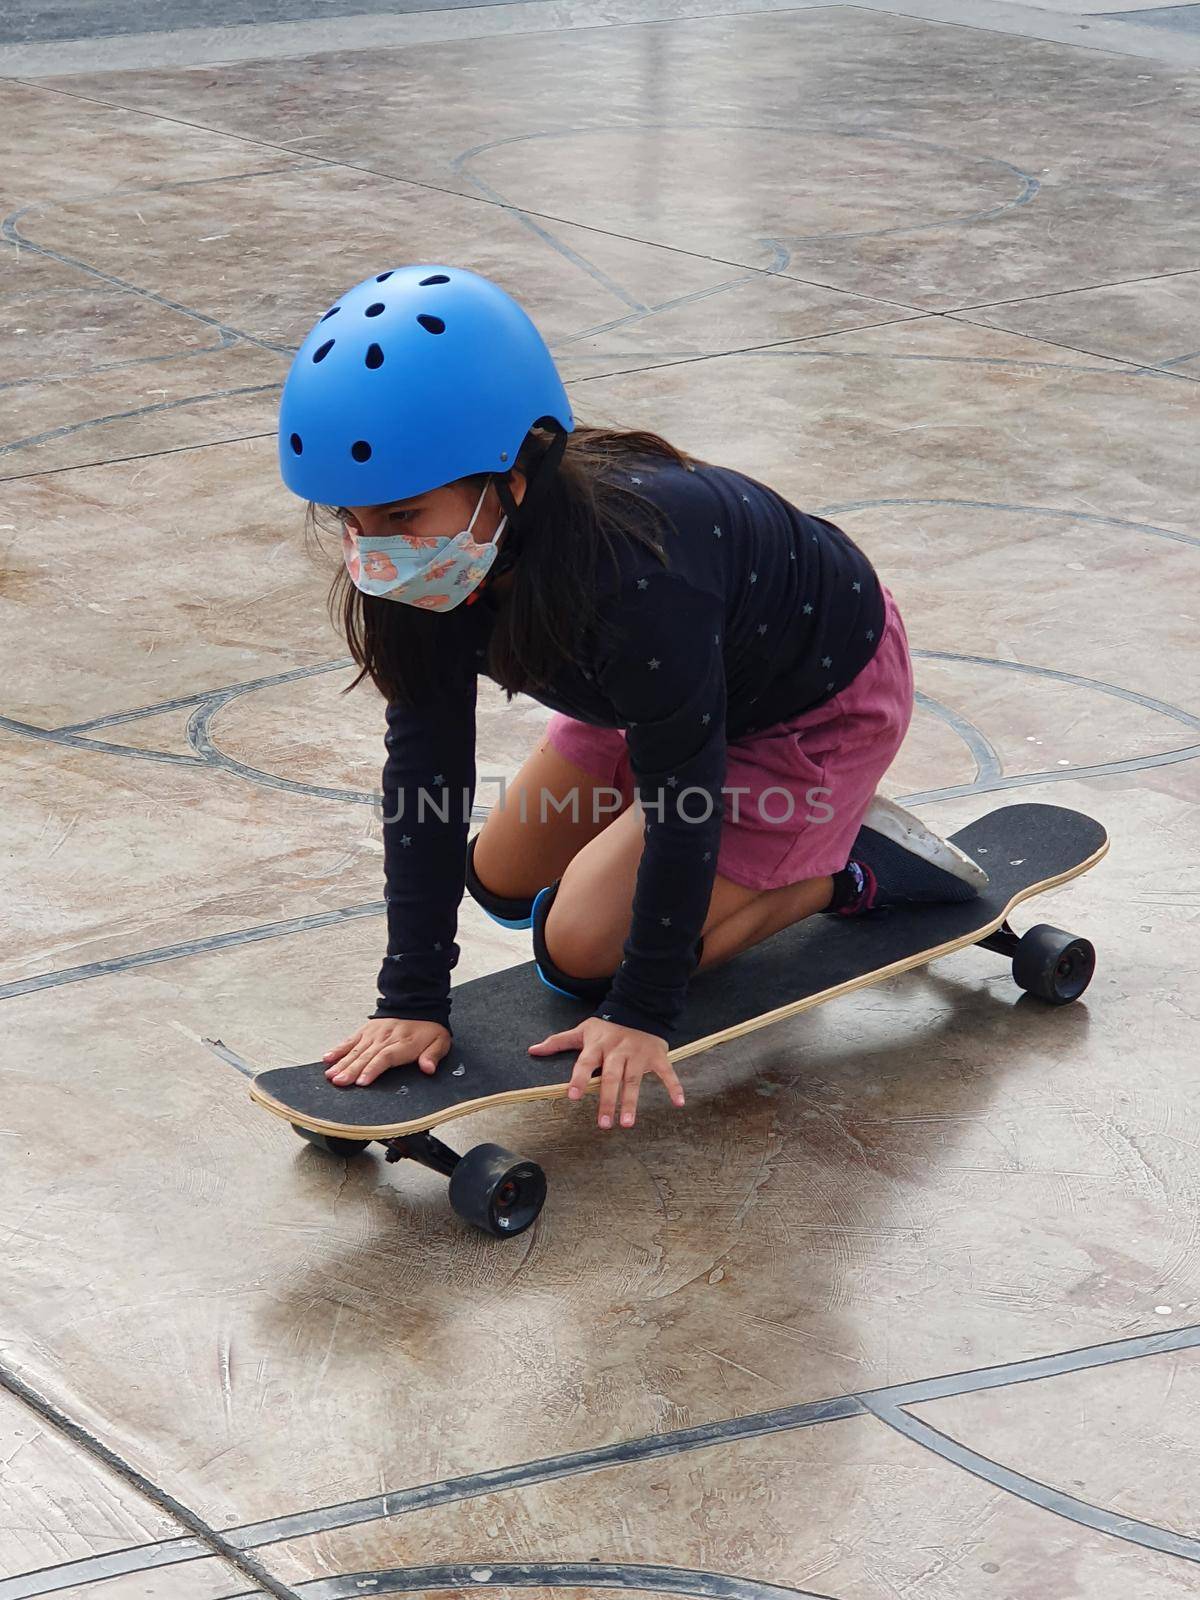 Beautiful skater girl riding on her longboard in the city